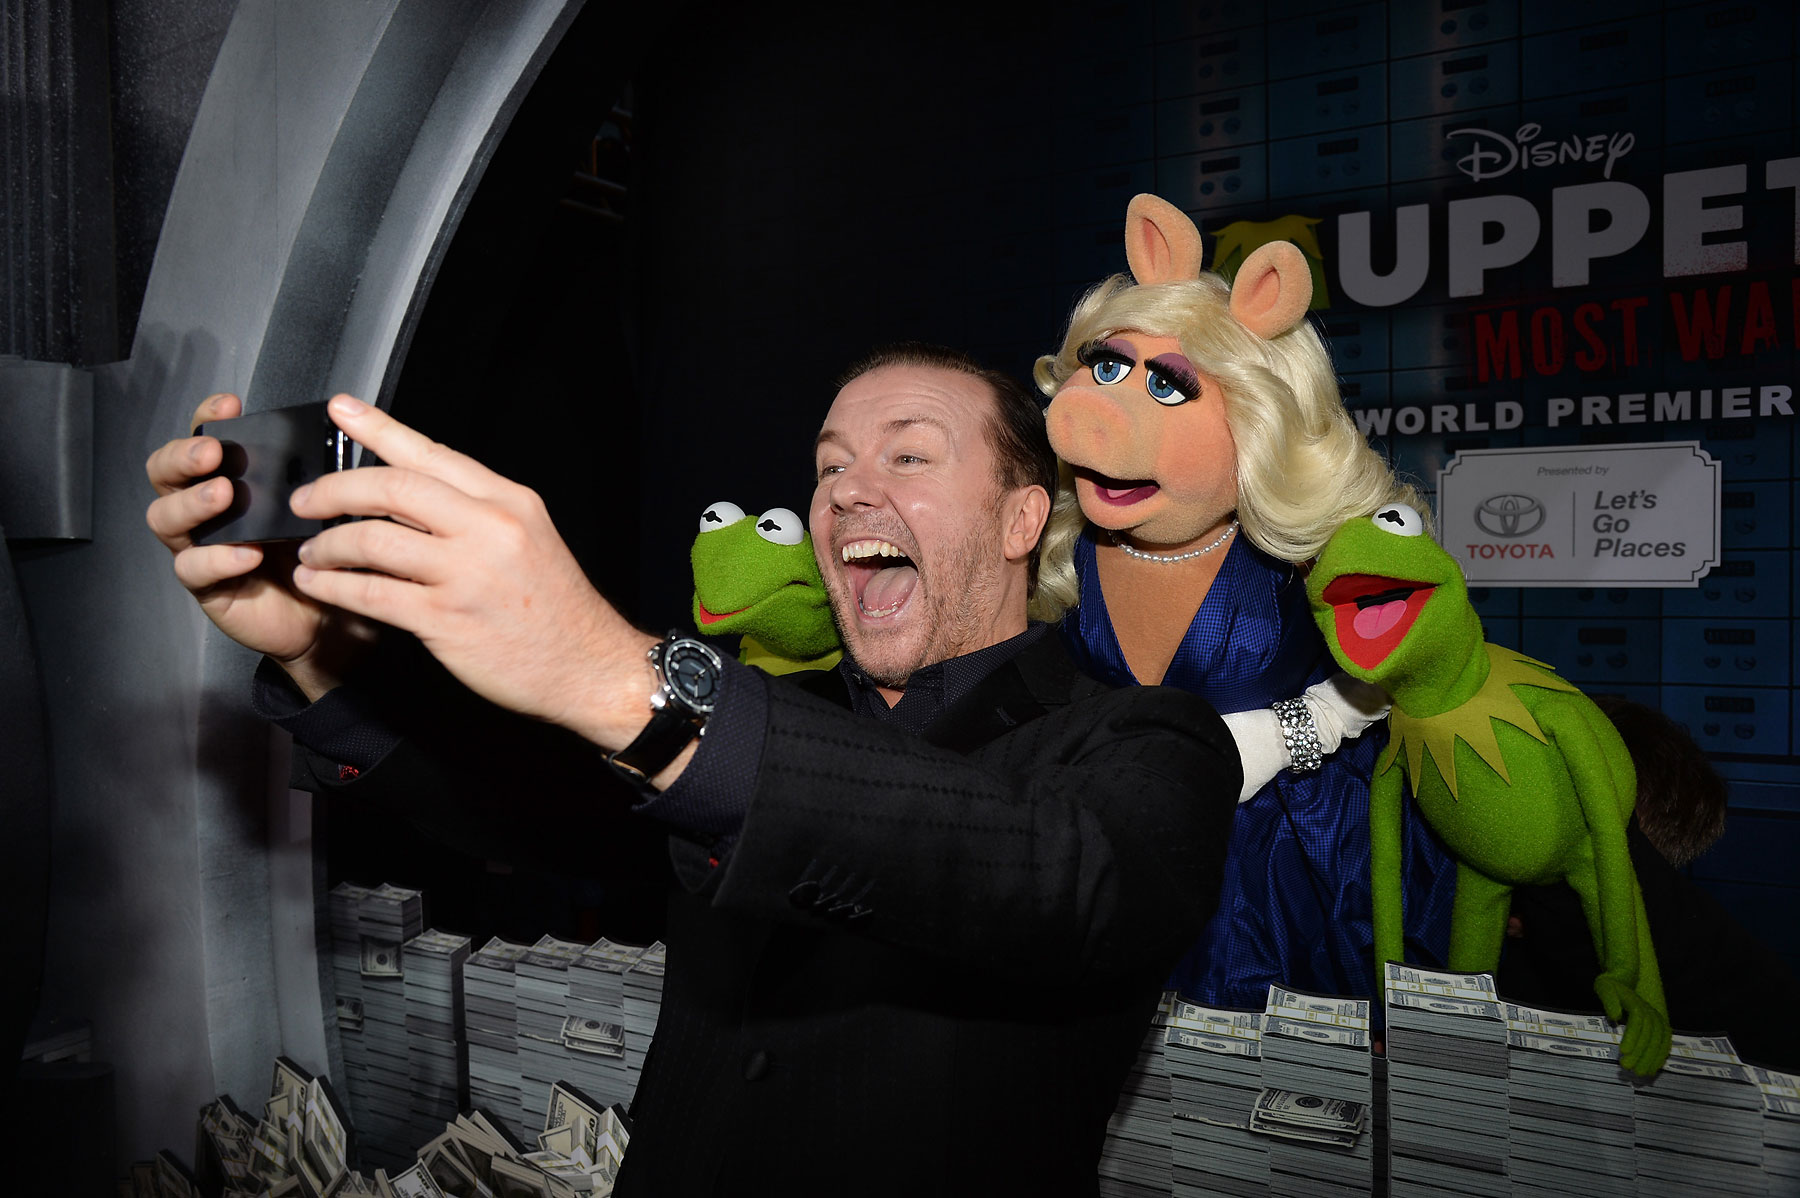 Ricky Gervais takes a selfie with his castmates from Muppets Most Wanted during the movie's premiere at the El Capitan Theatre on March 11, 2014 in Hollywood, Ca.